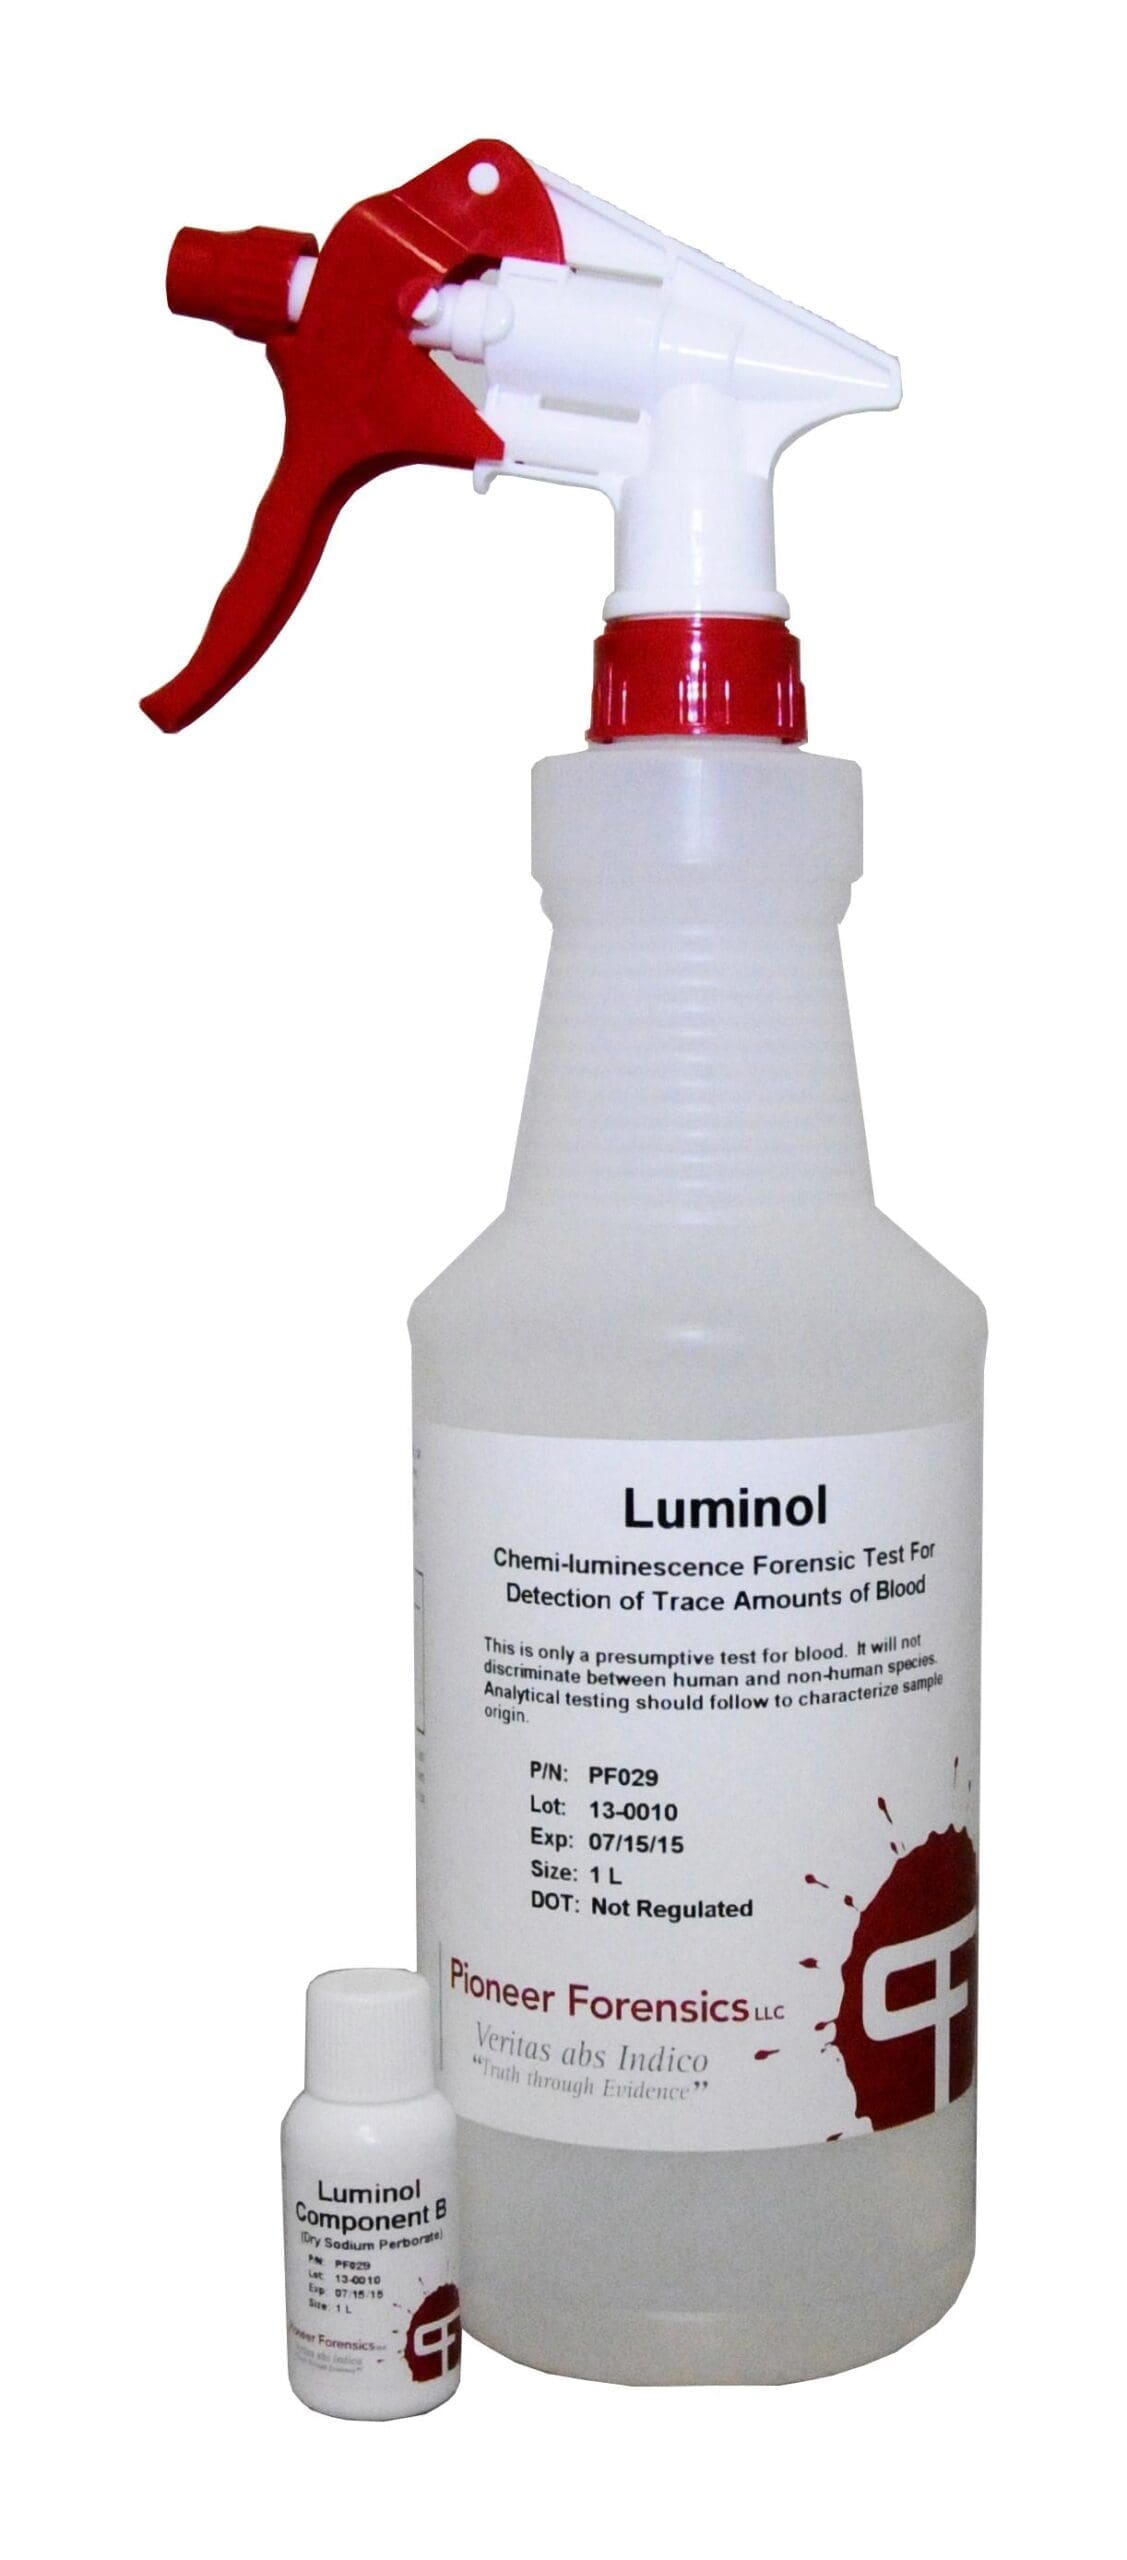 Luminol chemiluminescent method is useful in searching large areas for traces of blood.